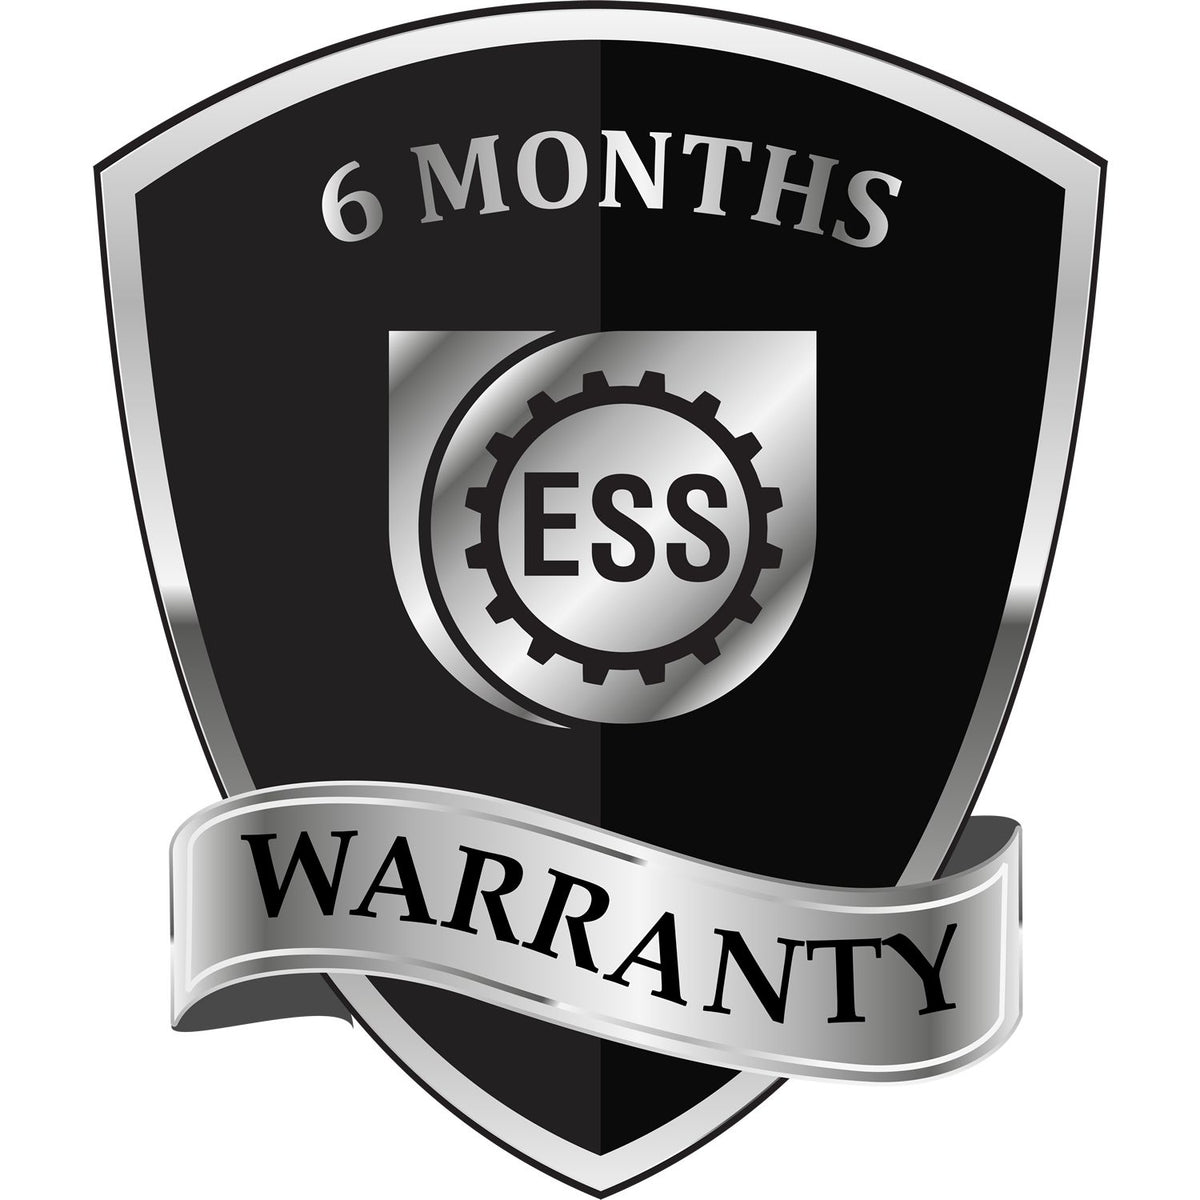 A black and silver badge or emblem showing warranty information for the Vermont Professional Geologist Seal Stamp